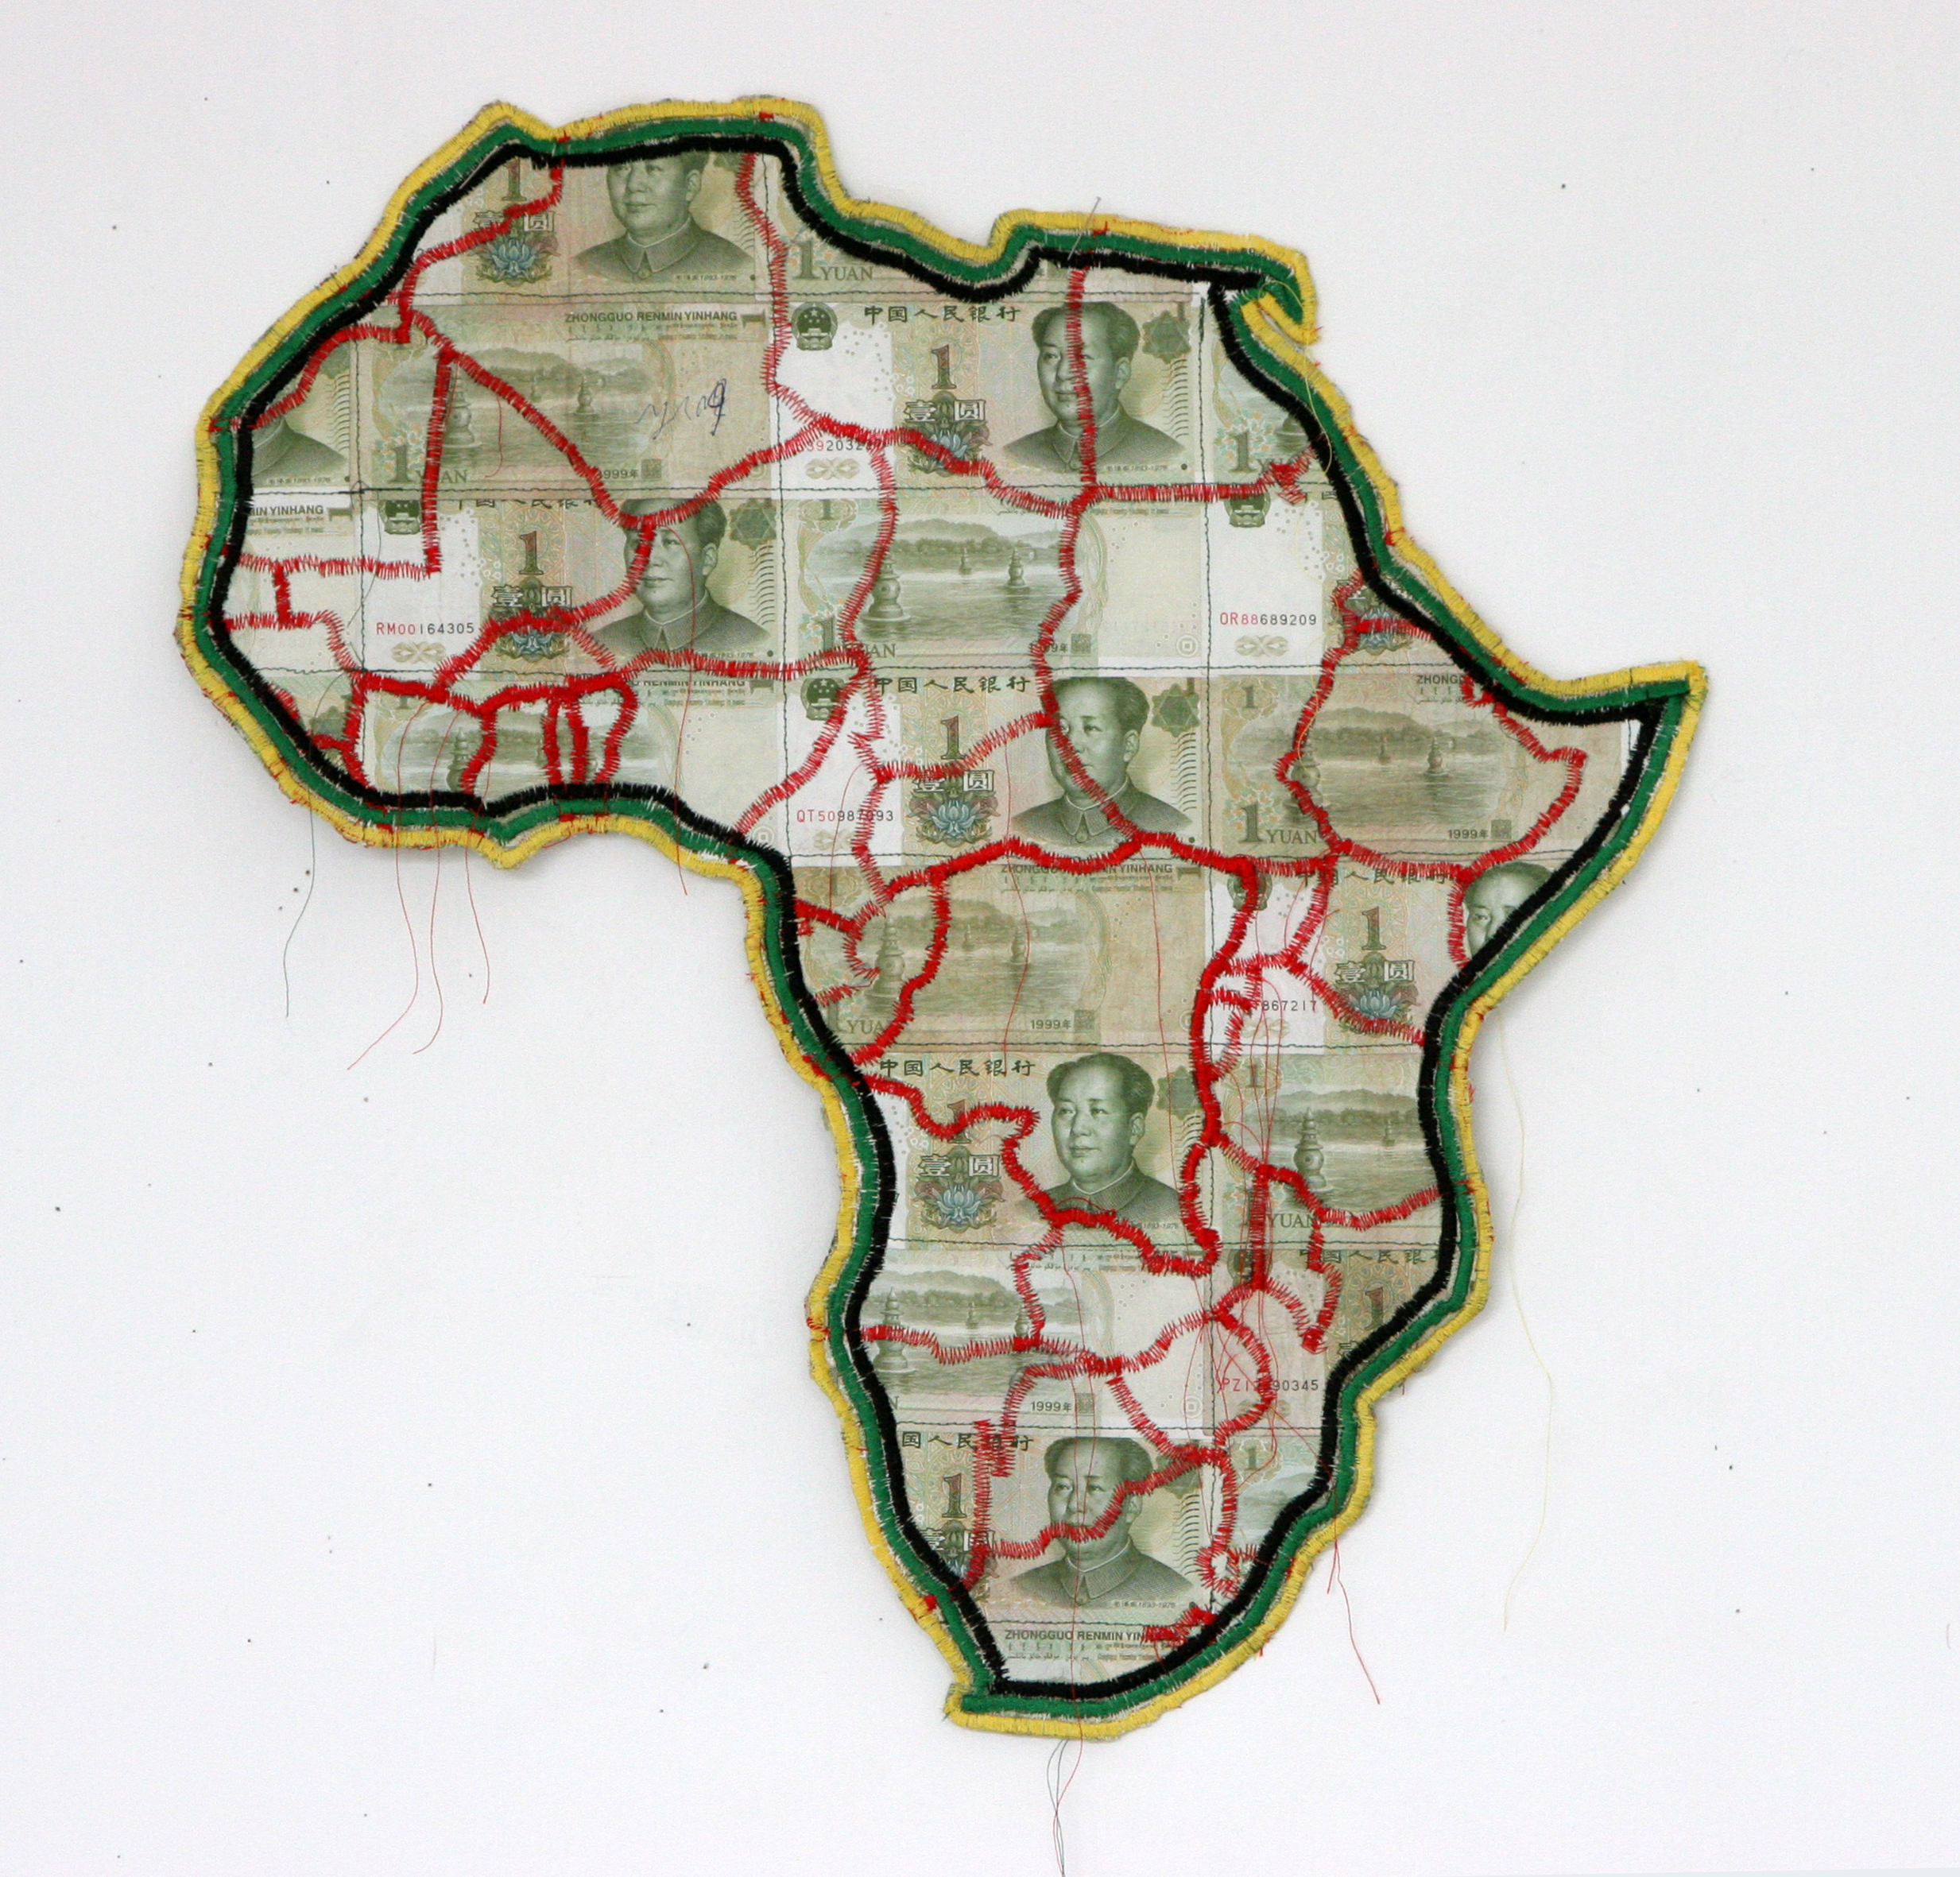 Susan Stockwell, Africa, Chinese Yuan currency notes & cotton thread, 74 x 65 x 3.5 cm, 2012